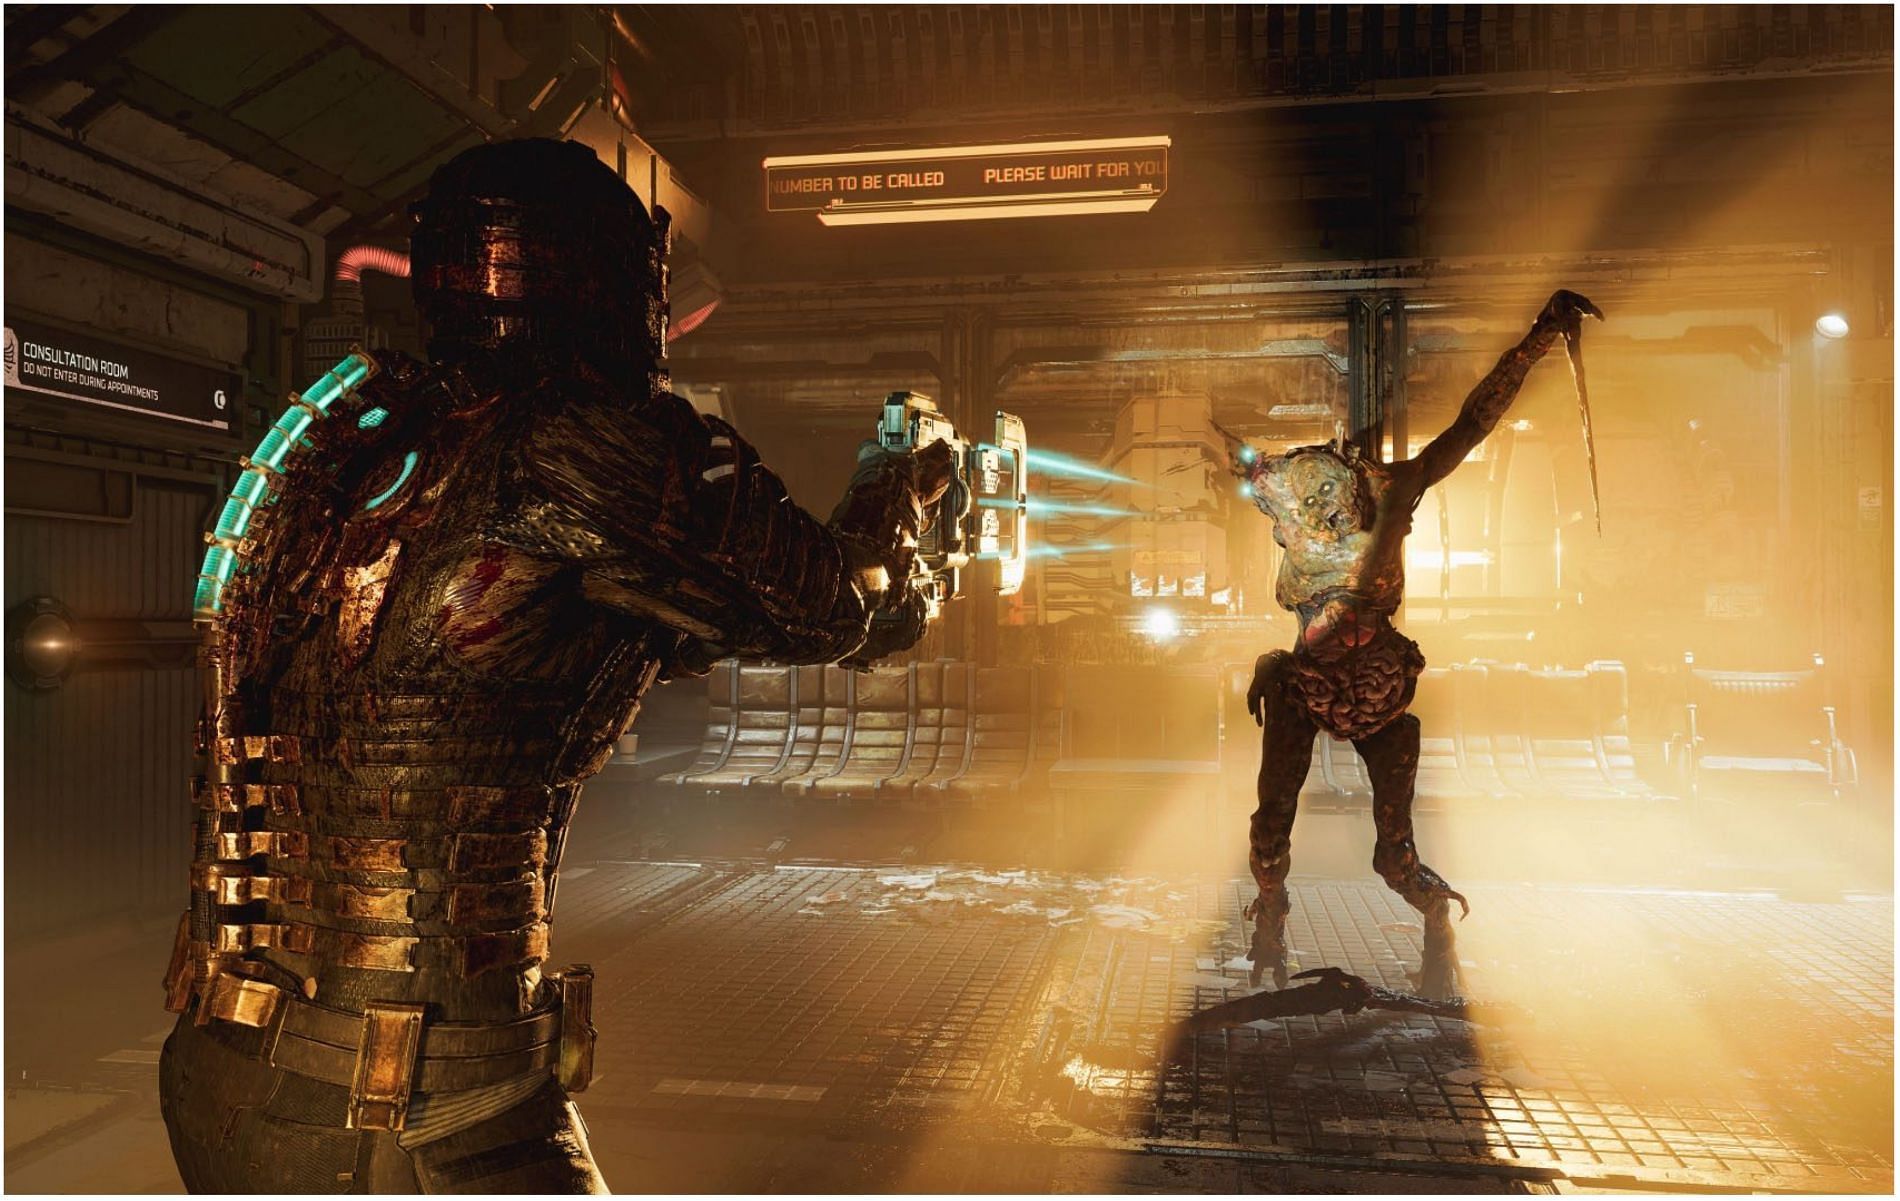 On January 27, 2023, Dead Space will be available on PC, PS5, and Xbox Series X/S (Image via EA.com)